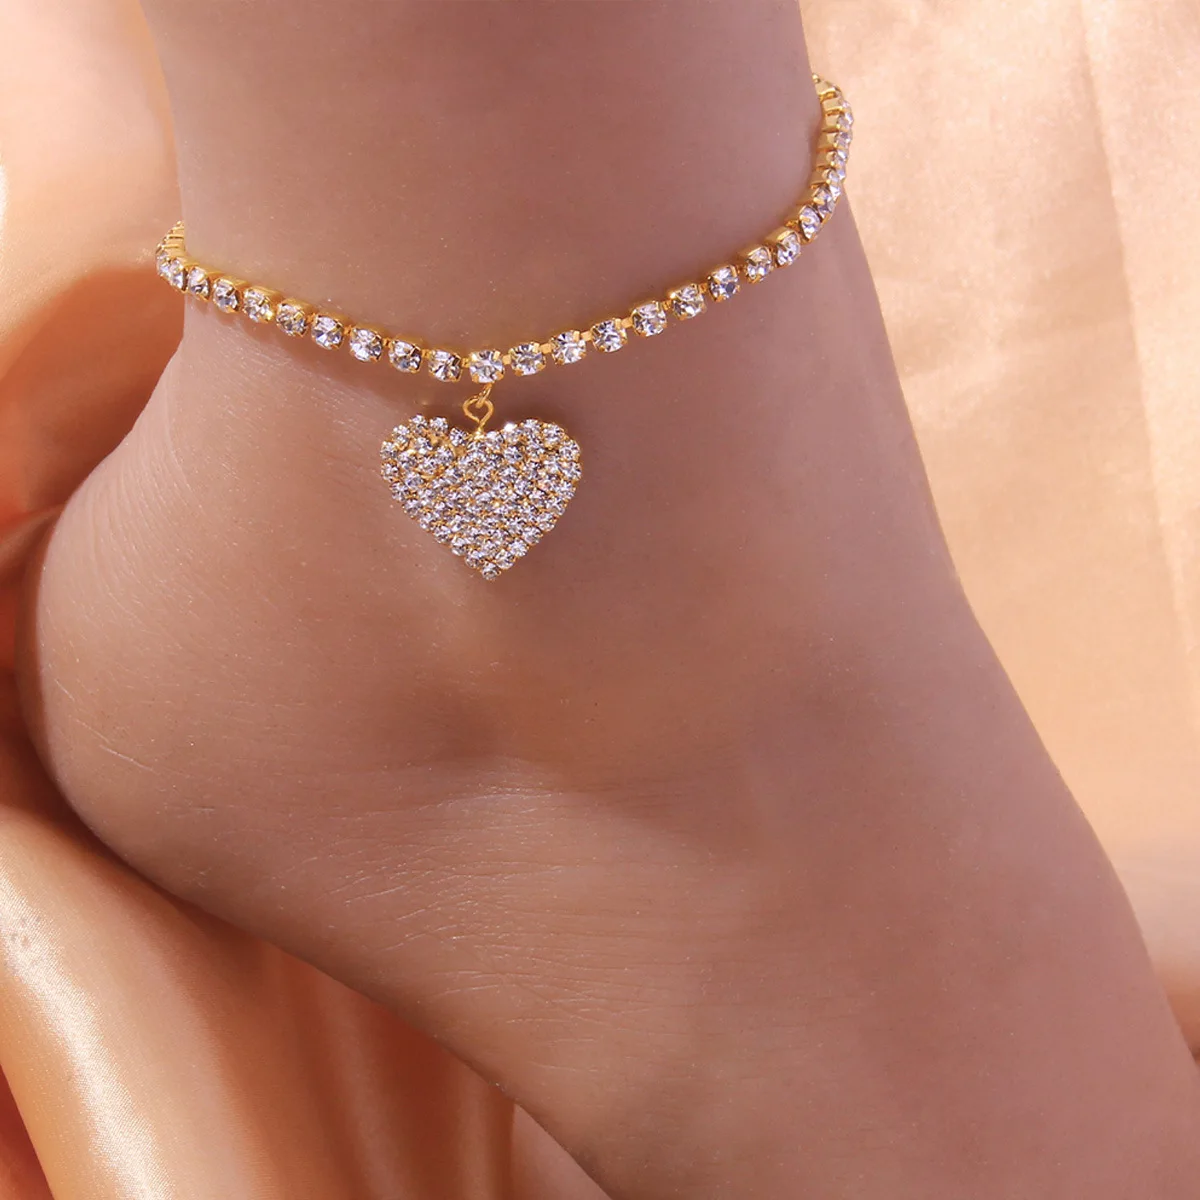 

Barefoot Foot Jewelry Gold Plated Anklet Bracelet Silver Tennis Rhinestone Crystal Love Heart Charm Anklet For Women